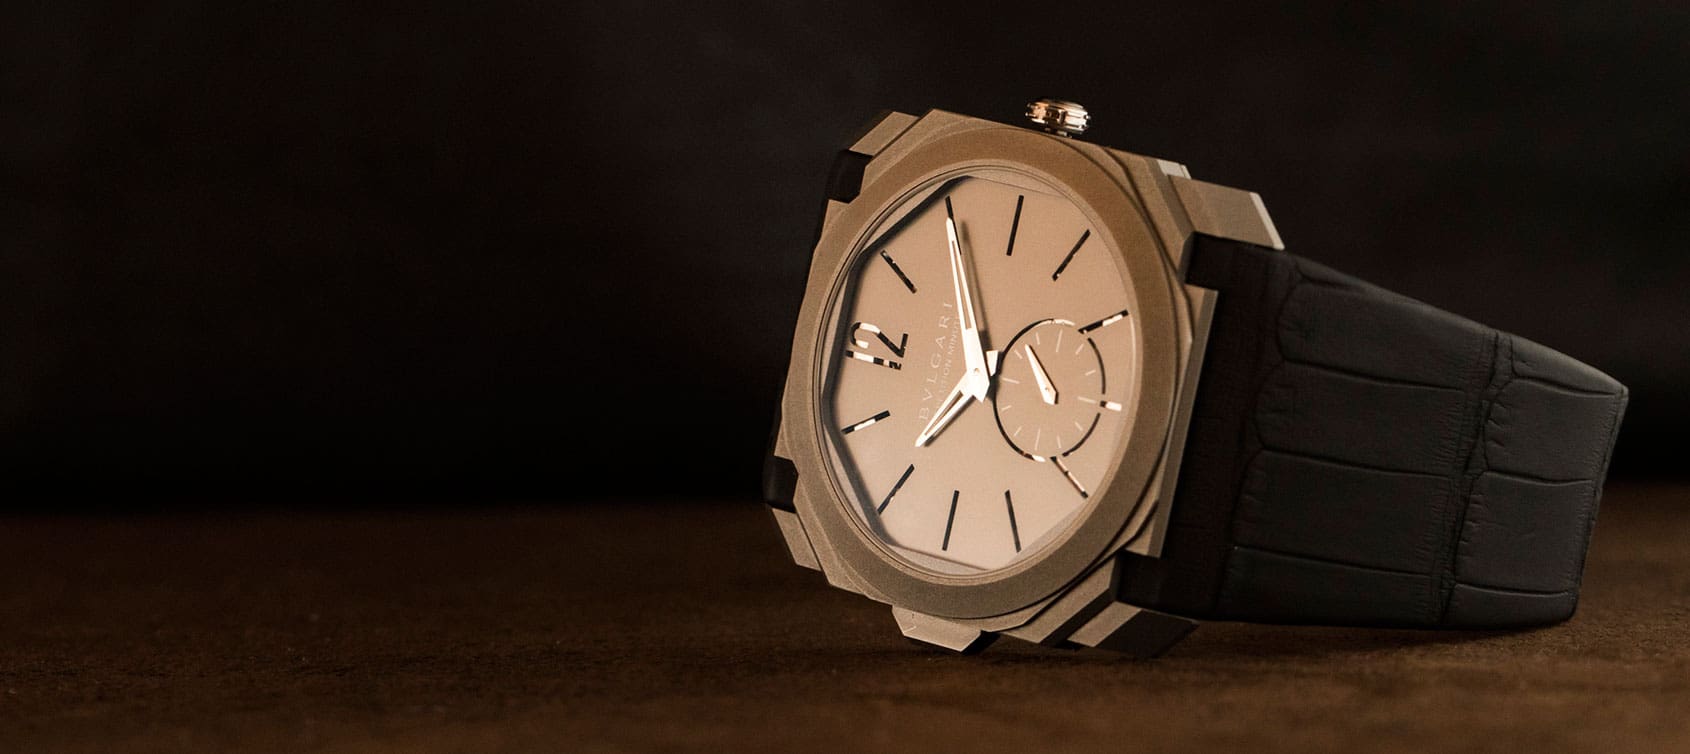 GONE IN 60 SECONDS: The Bulgari Octo Finissimo Minute Repeater, slender looks and sweet sounds